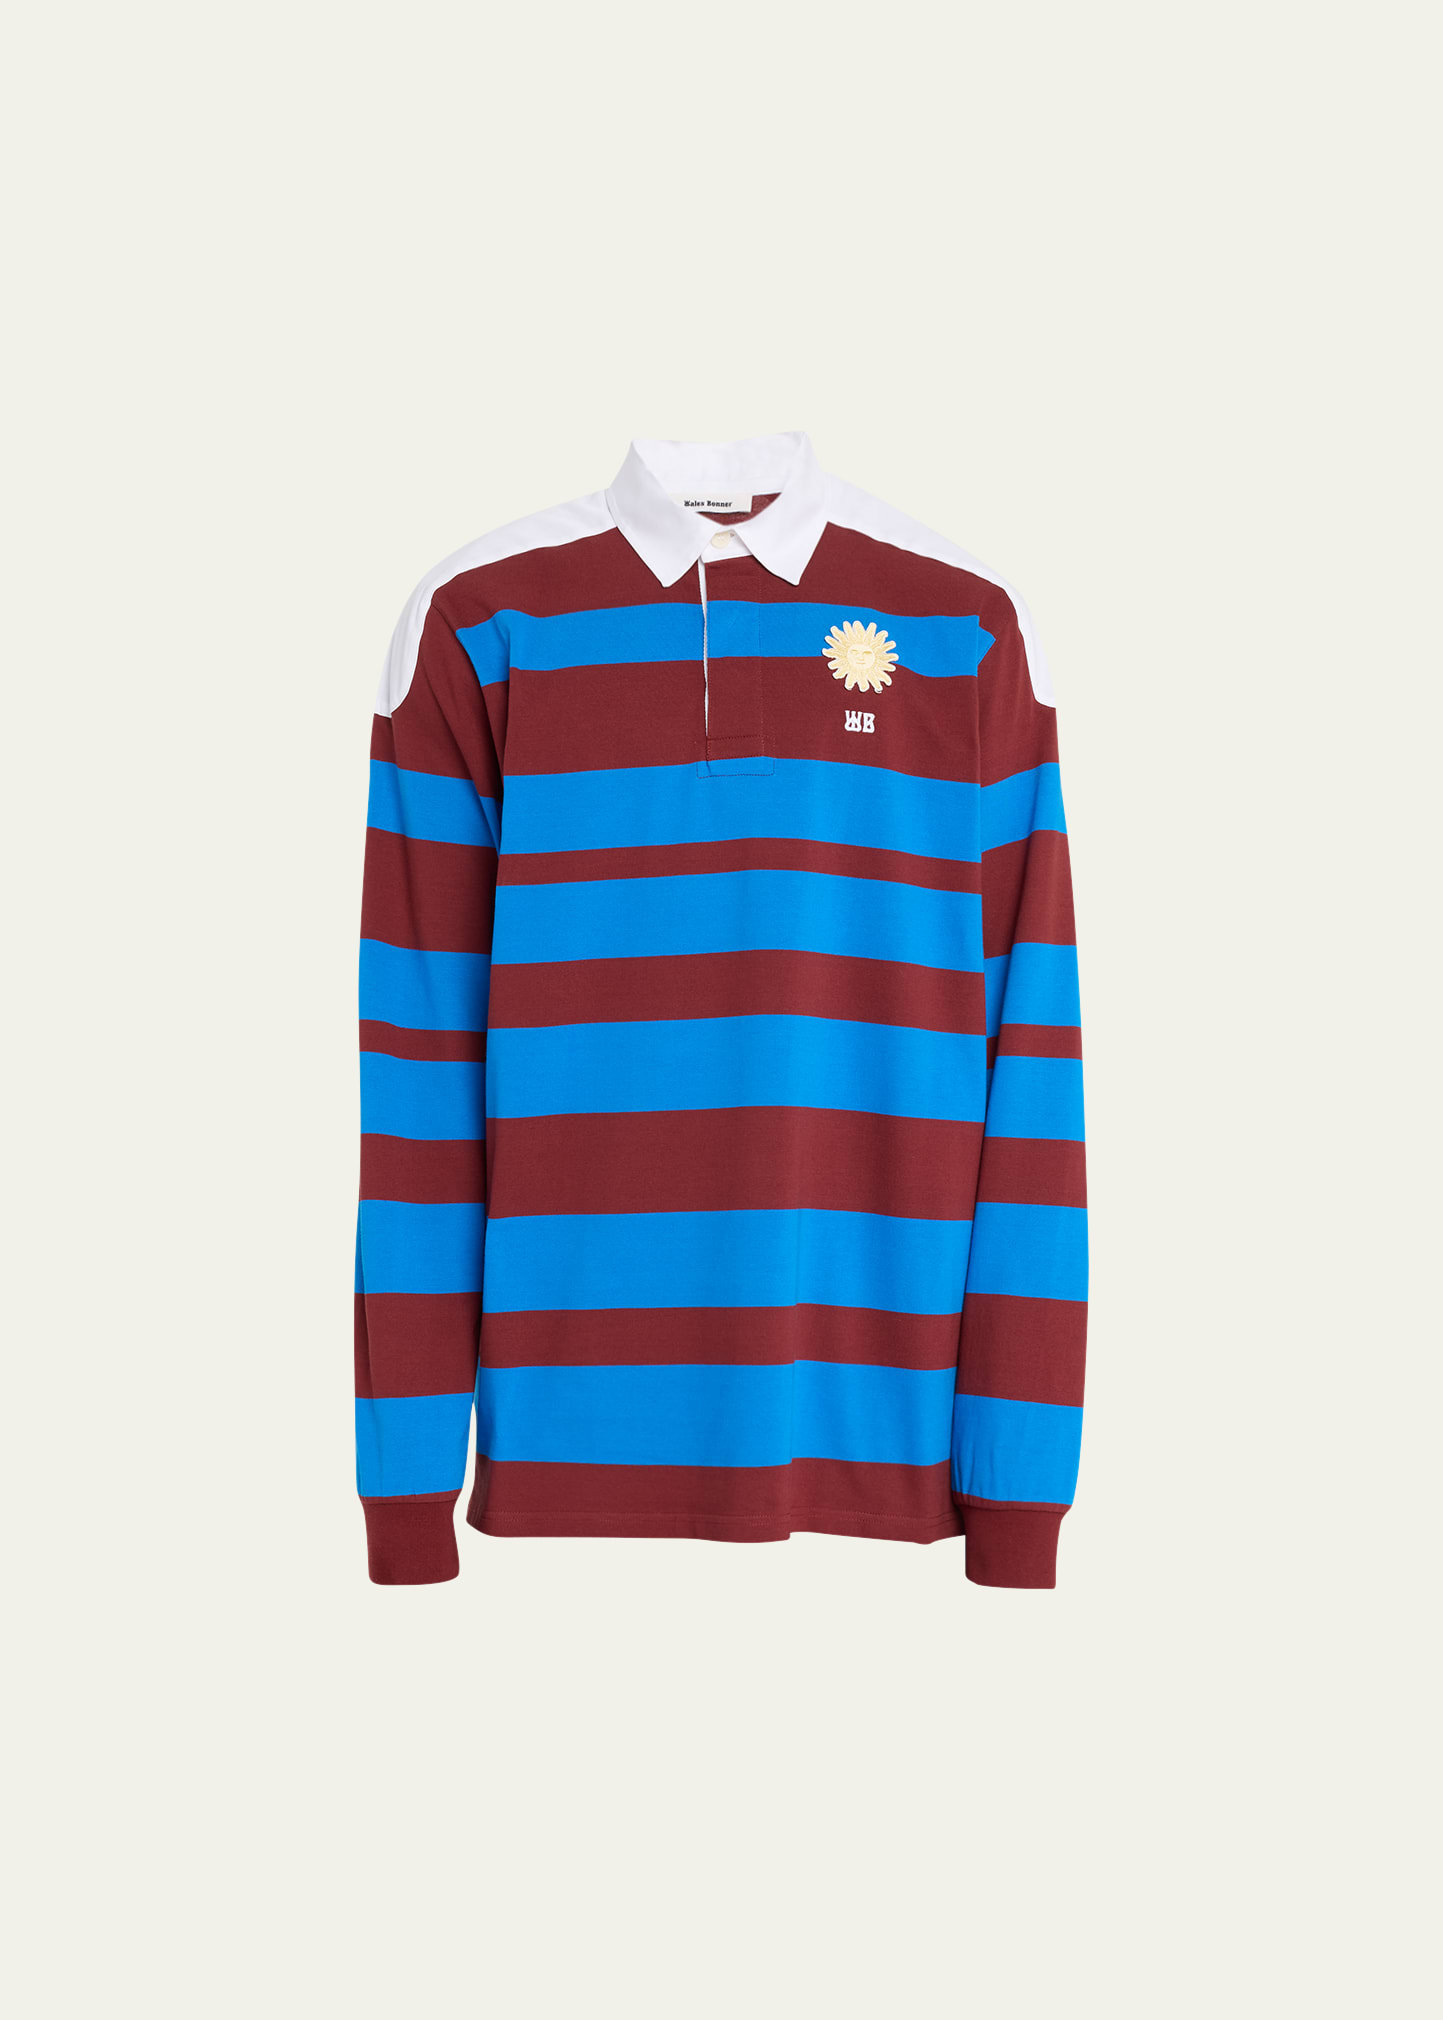 Shop Wales Bonner Men's Block Stripe Rugby Shirt In Blue And Red